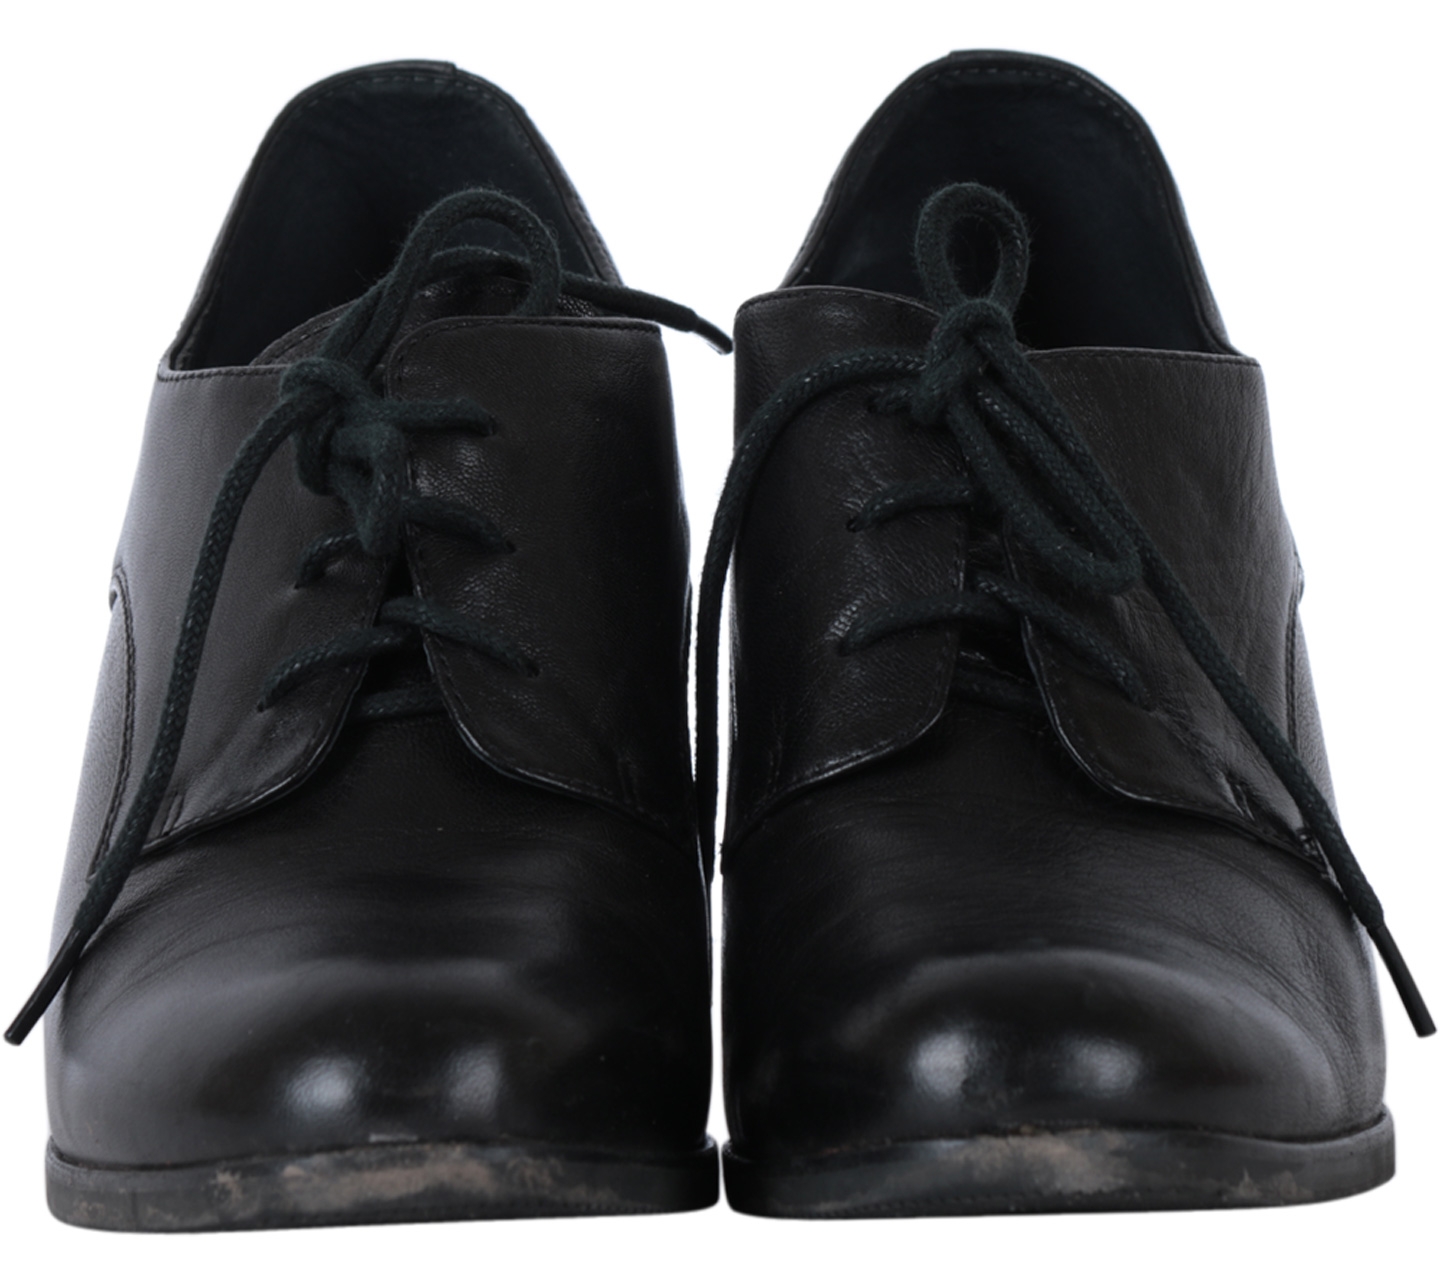 Staccato Black Lace Up Boots